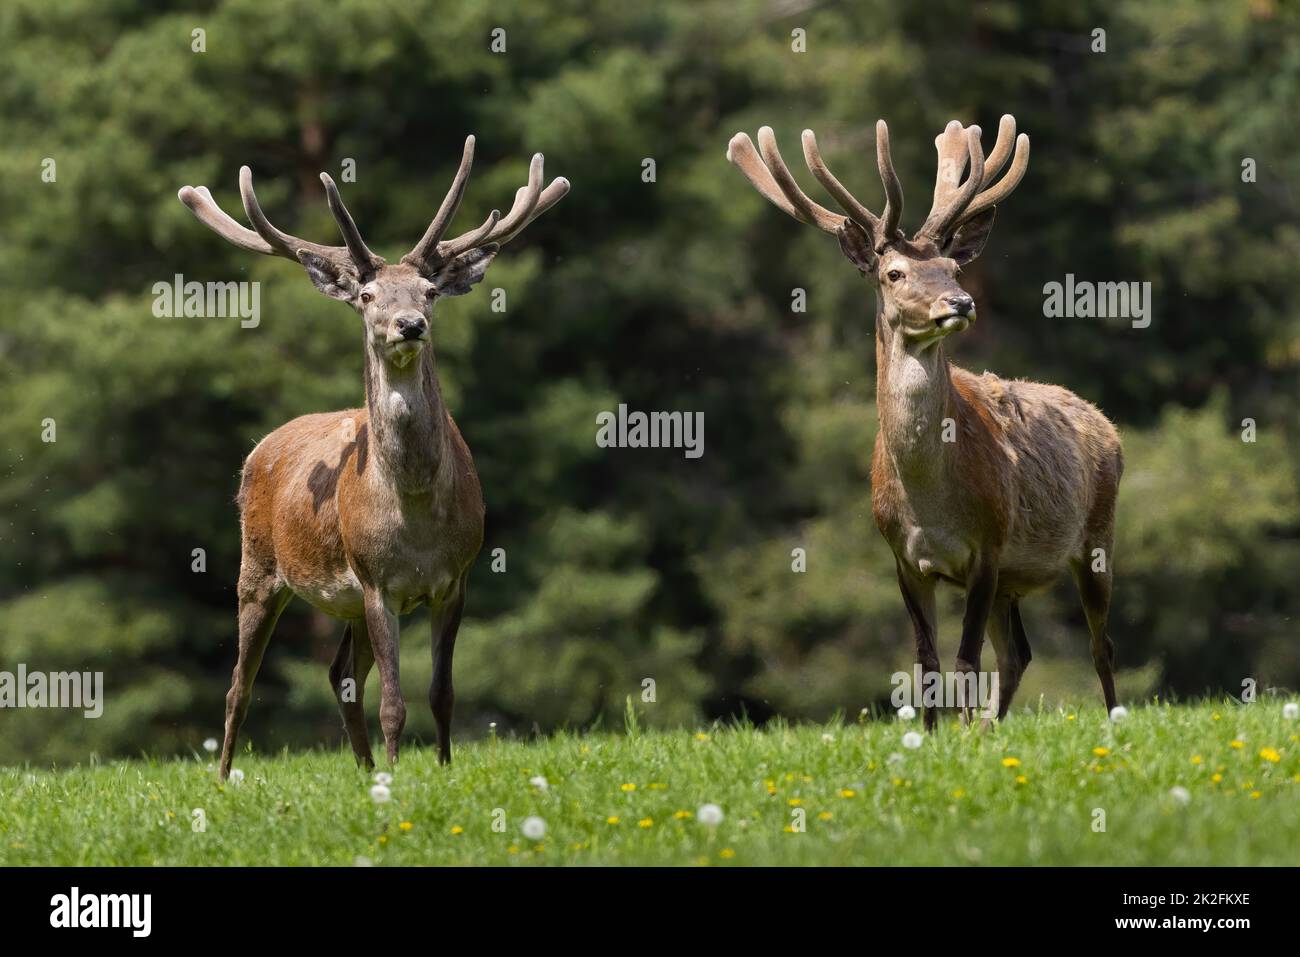 Two red deer with velvet antlers standing on meadow Stock Photo